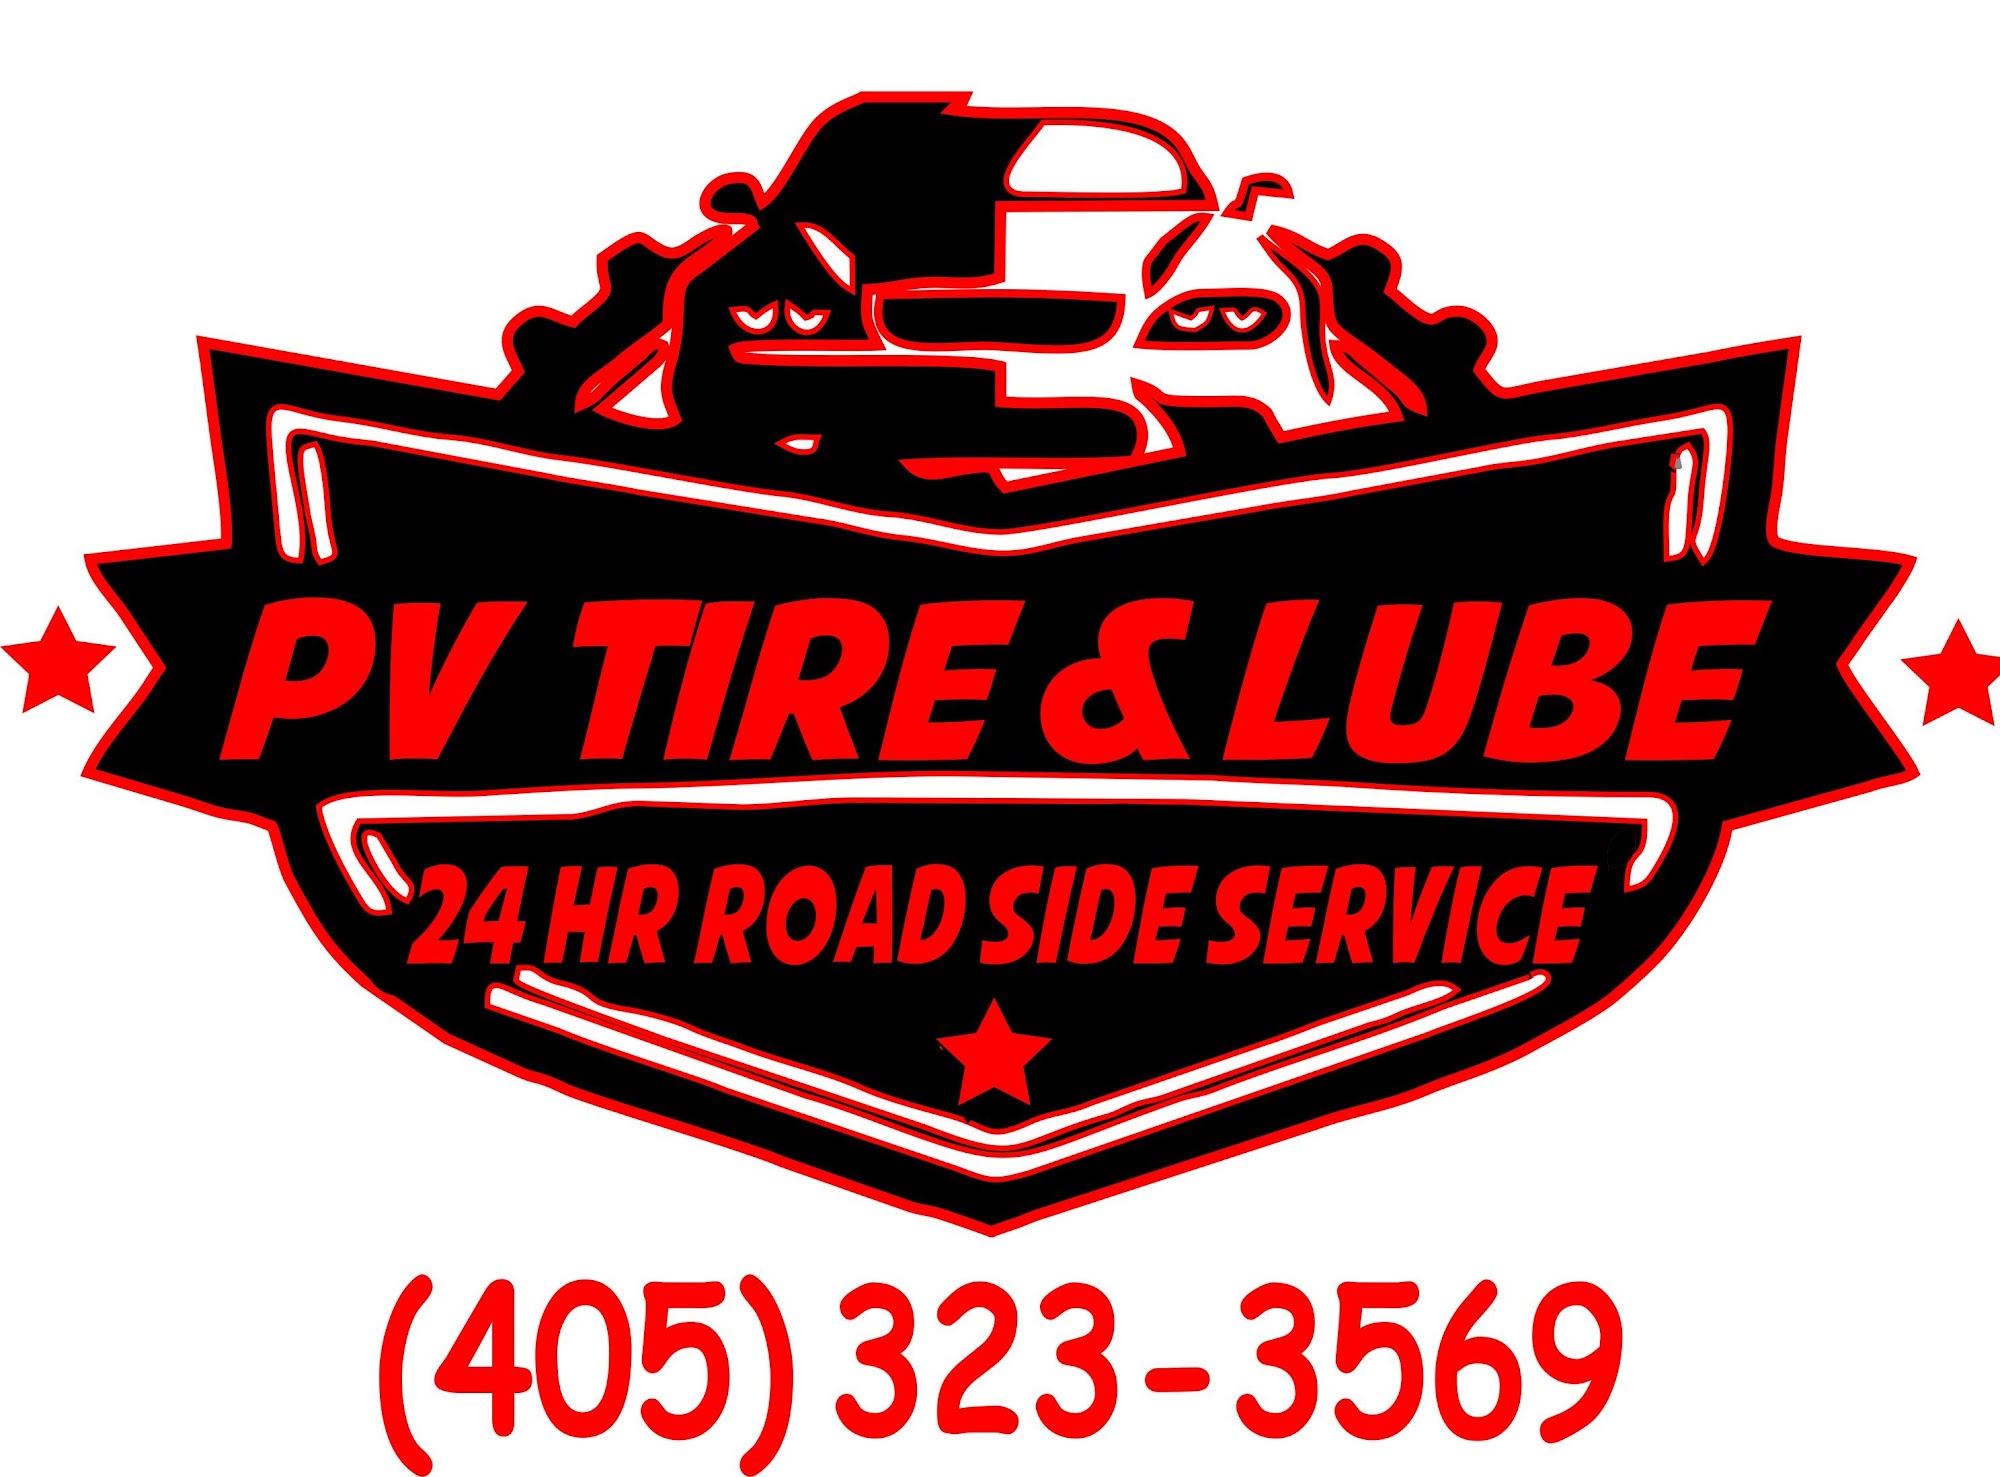 PV Tire & Lube 2299 W Grant Ave, Pauls Valley Oklahoma 73075